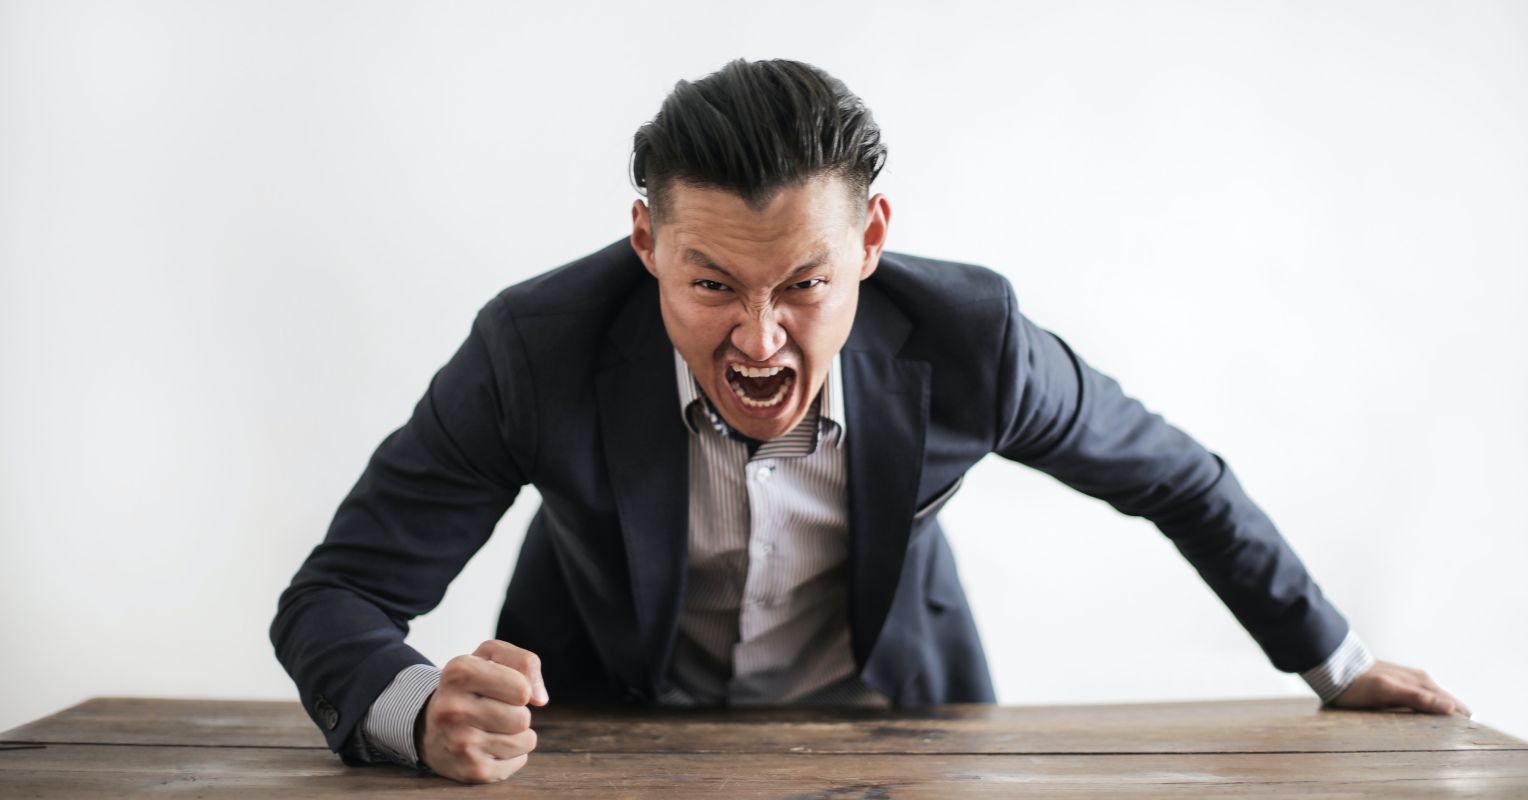 5 Signs That Your Boss Is a Toxic | Psychology Today